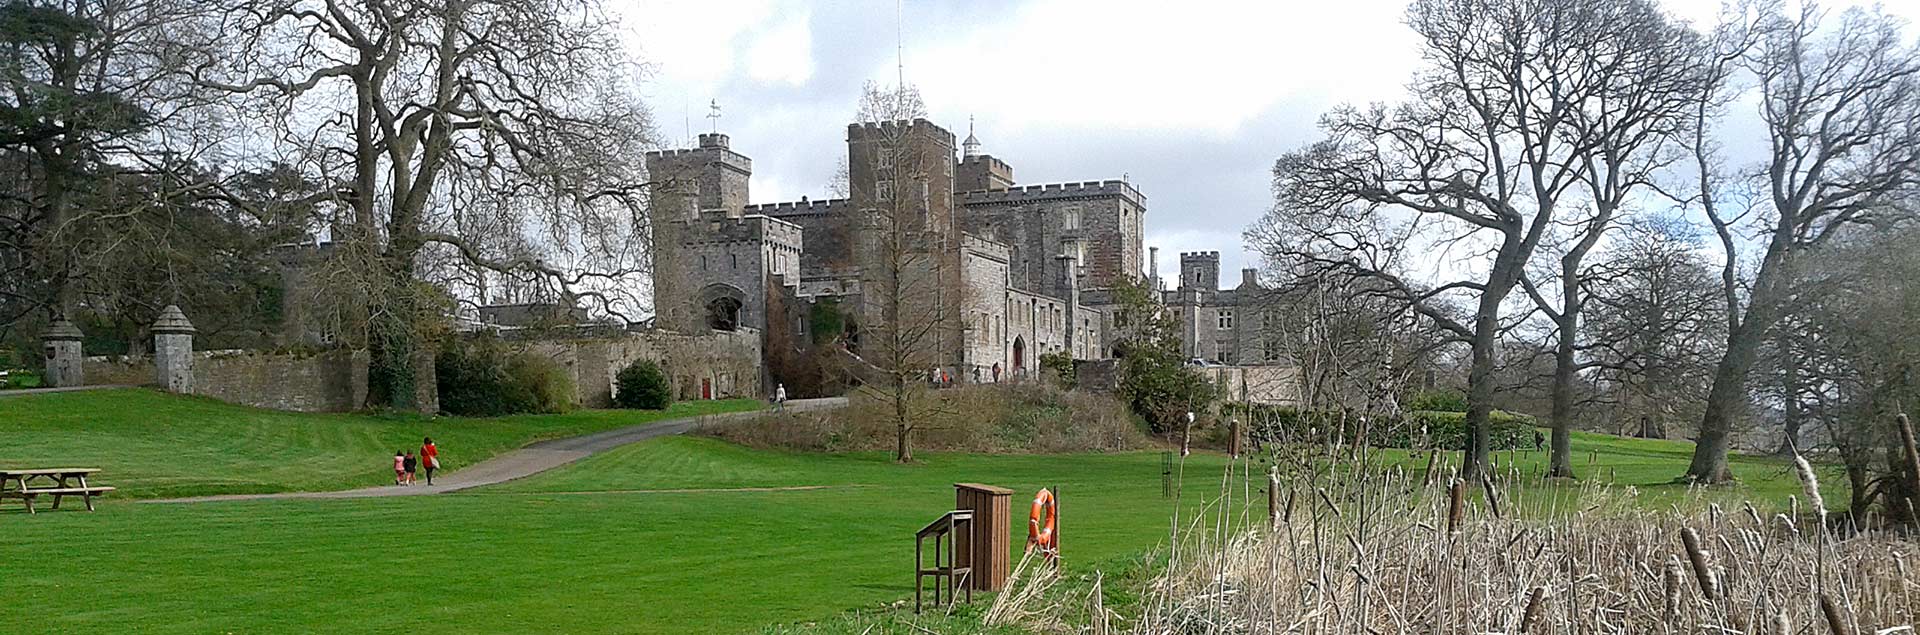 Rented pineapples and unicorn horns: A family day out at Powderham Castle